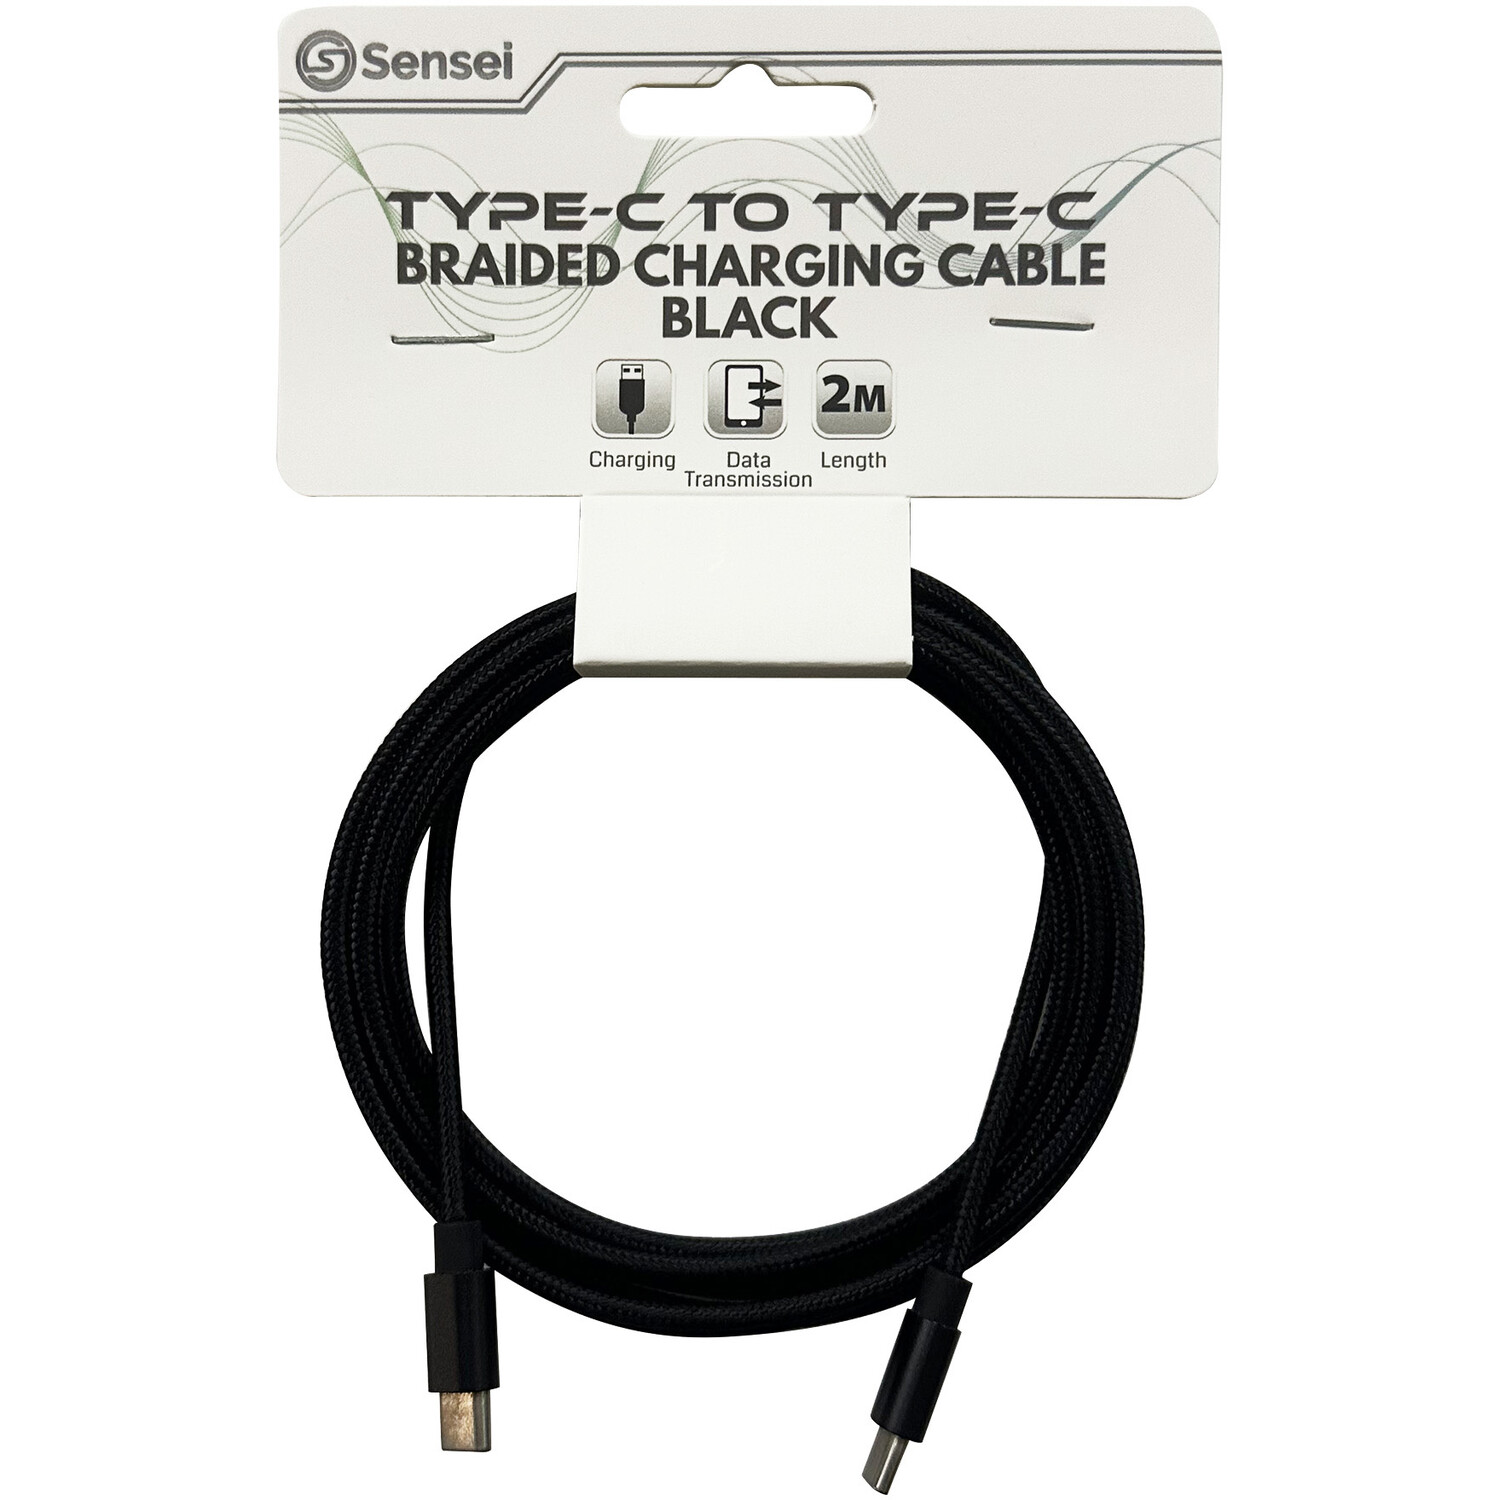 Type-C to Type-C Braided Cable Image